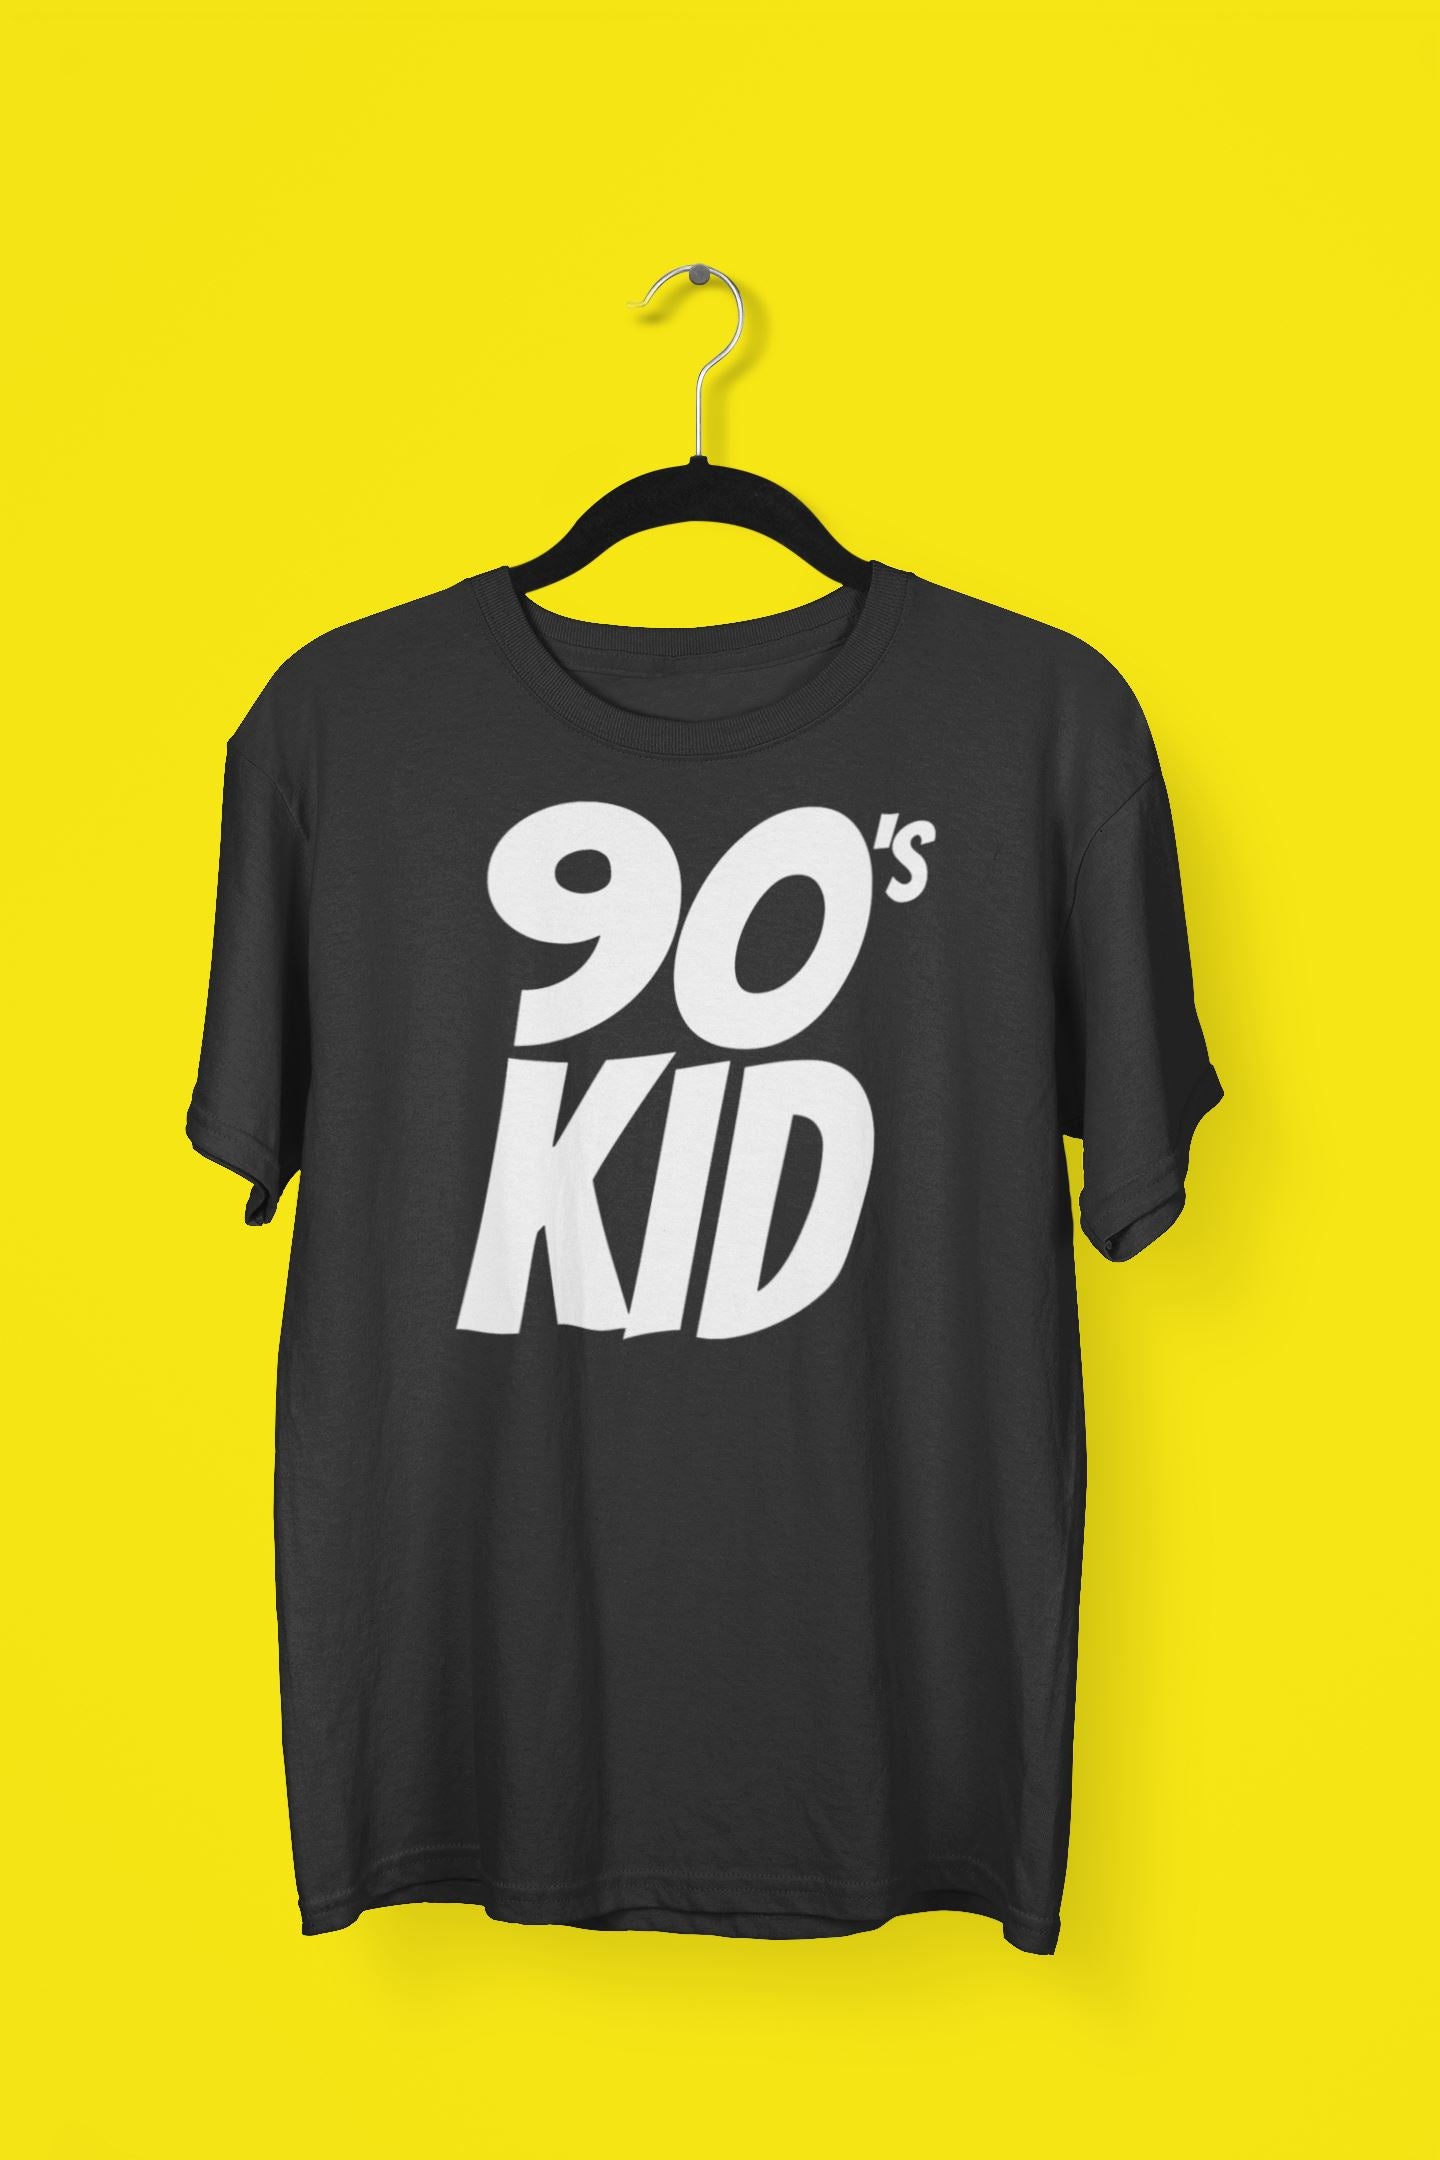 90"s Kid Special White T Shirt for Men and Women Born in the 90's freeshipping - Catch My Drift India